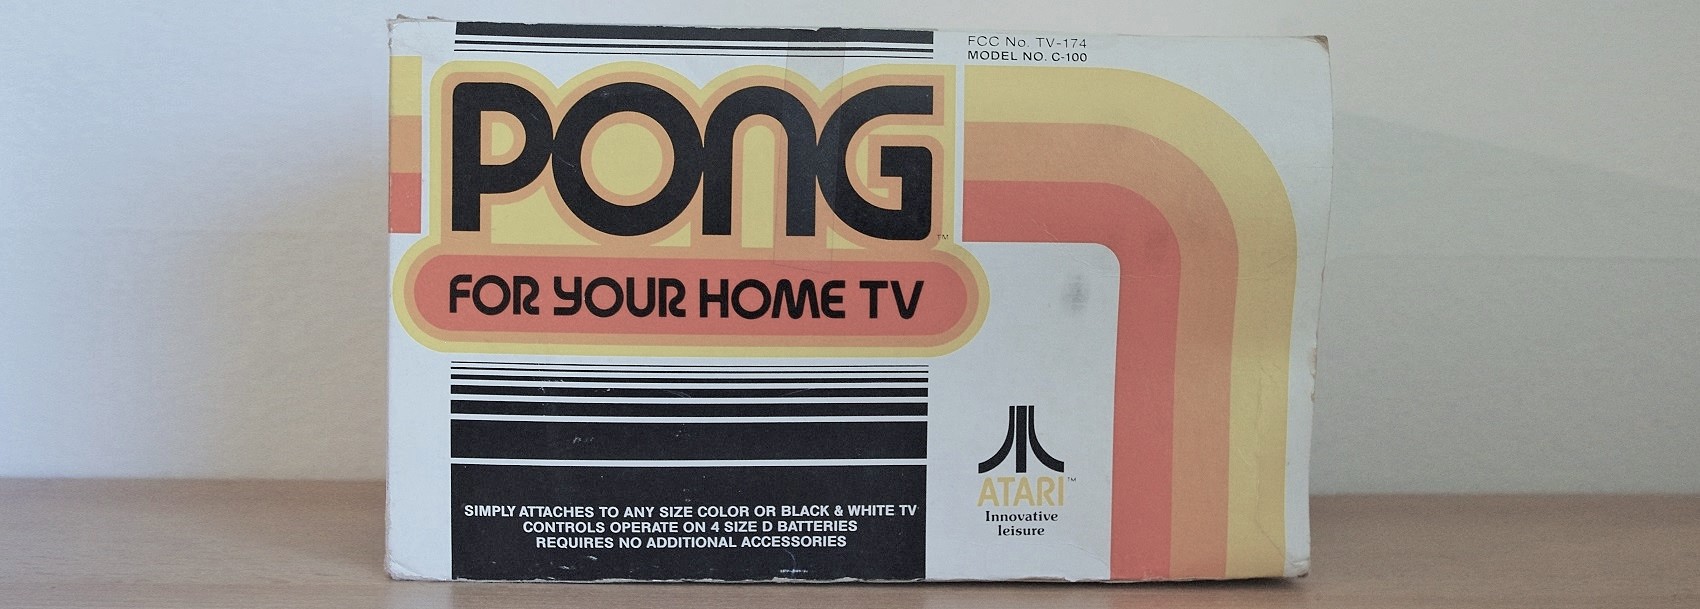 Original packaging of PONG C-100 from 1976.